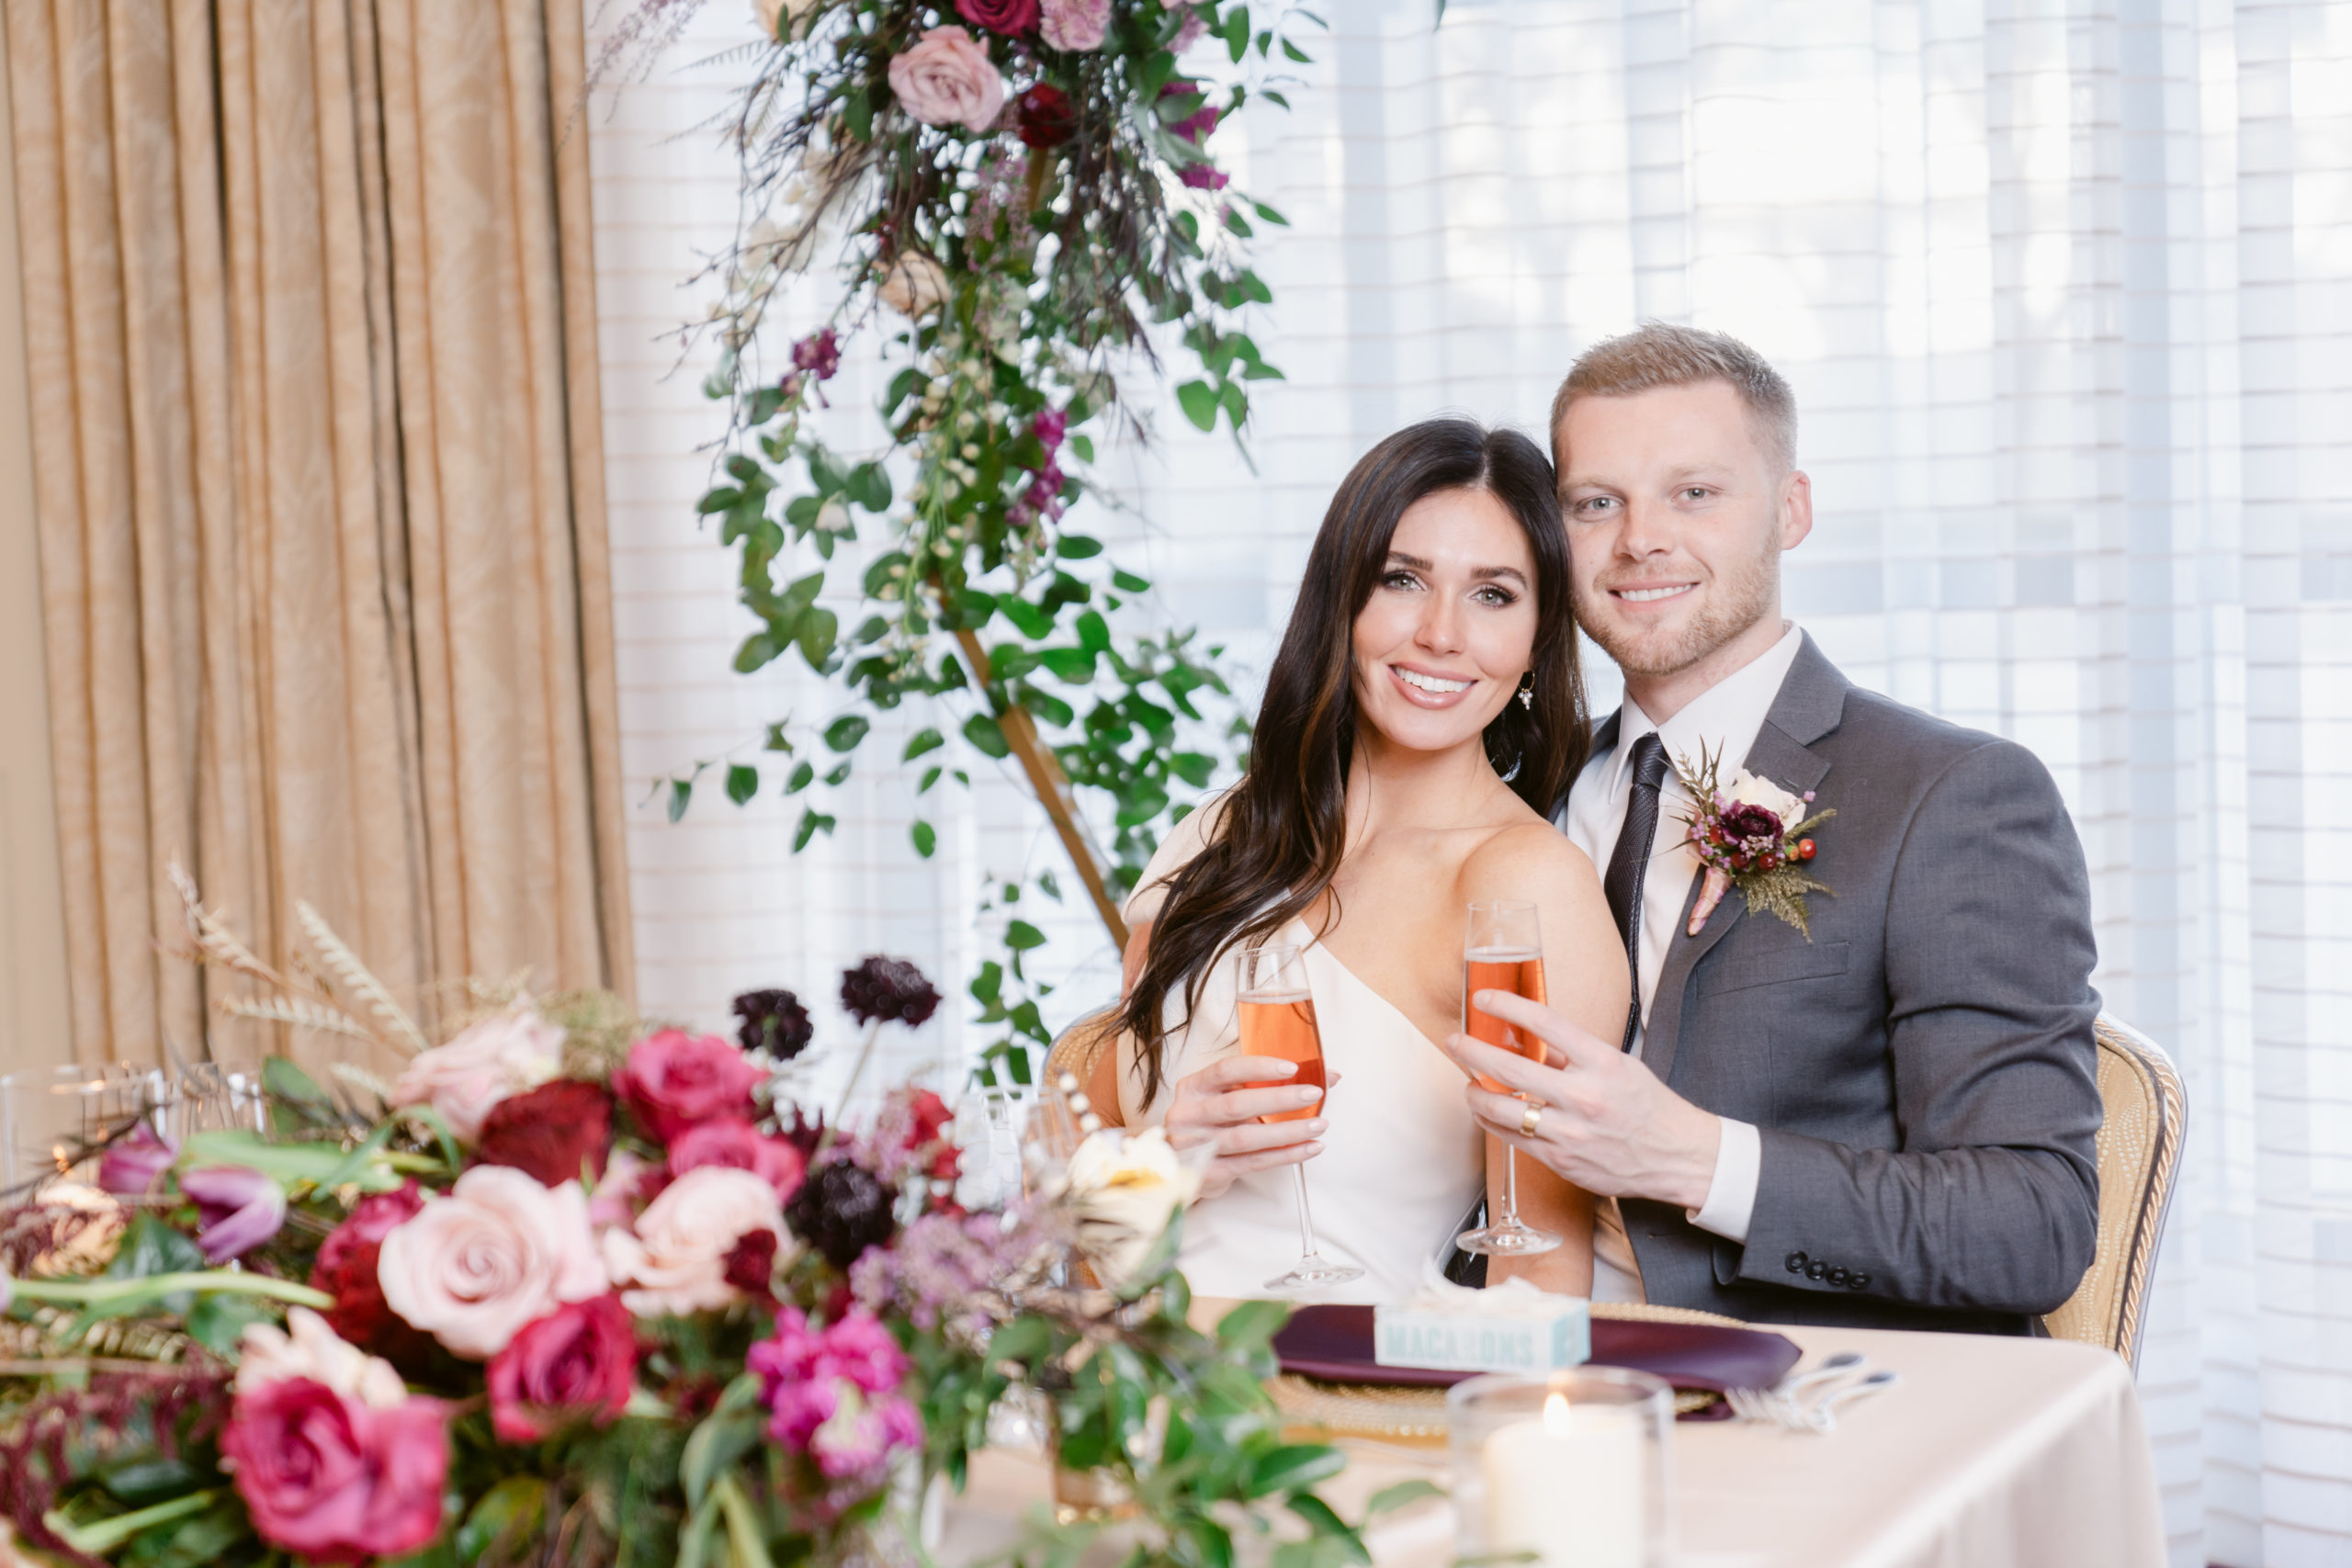 Bride and Groom at their Sweetheart's Table decorated with pink and red florals..